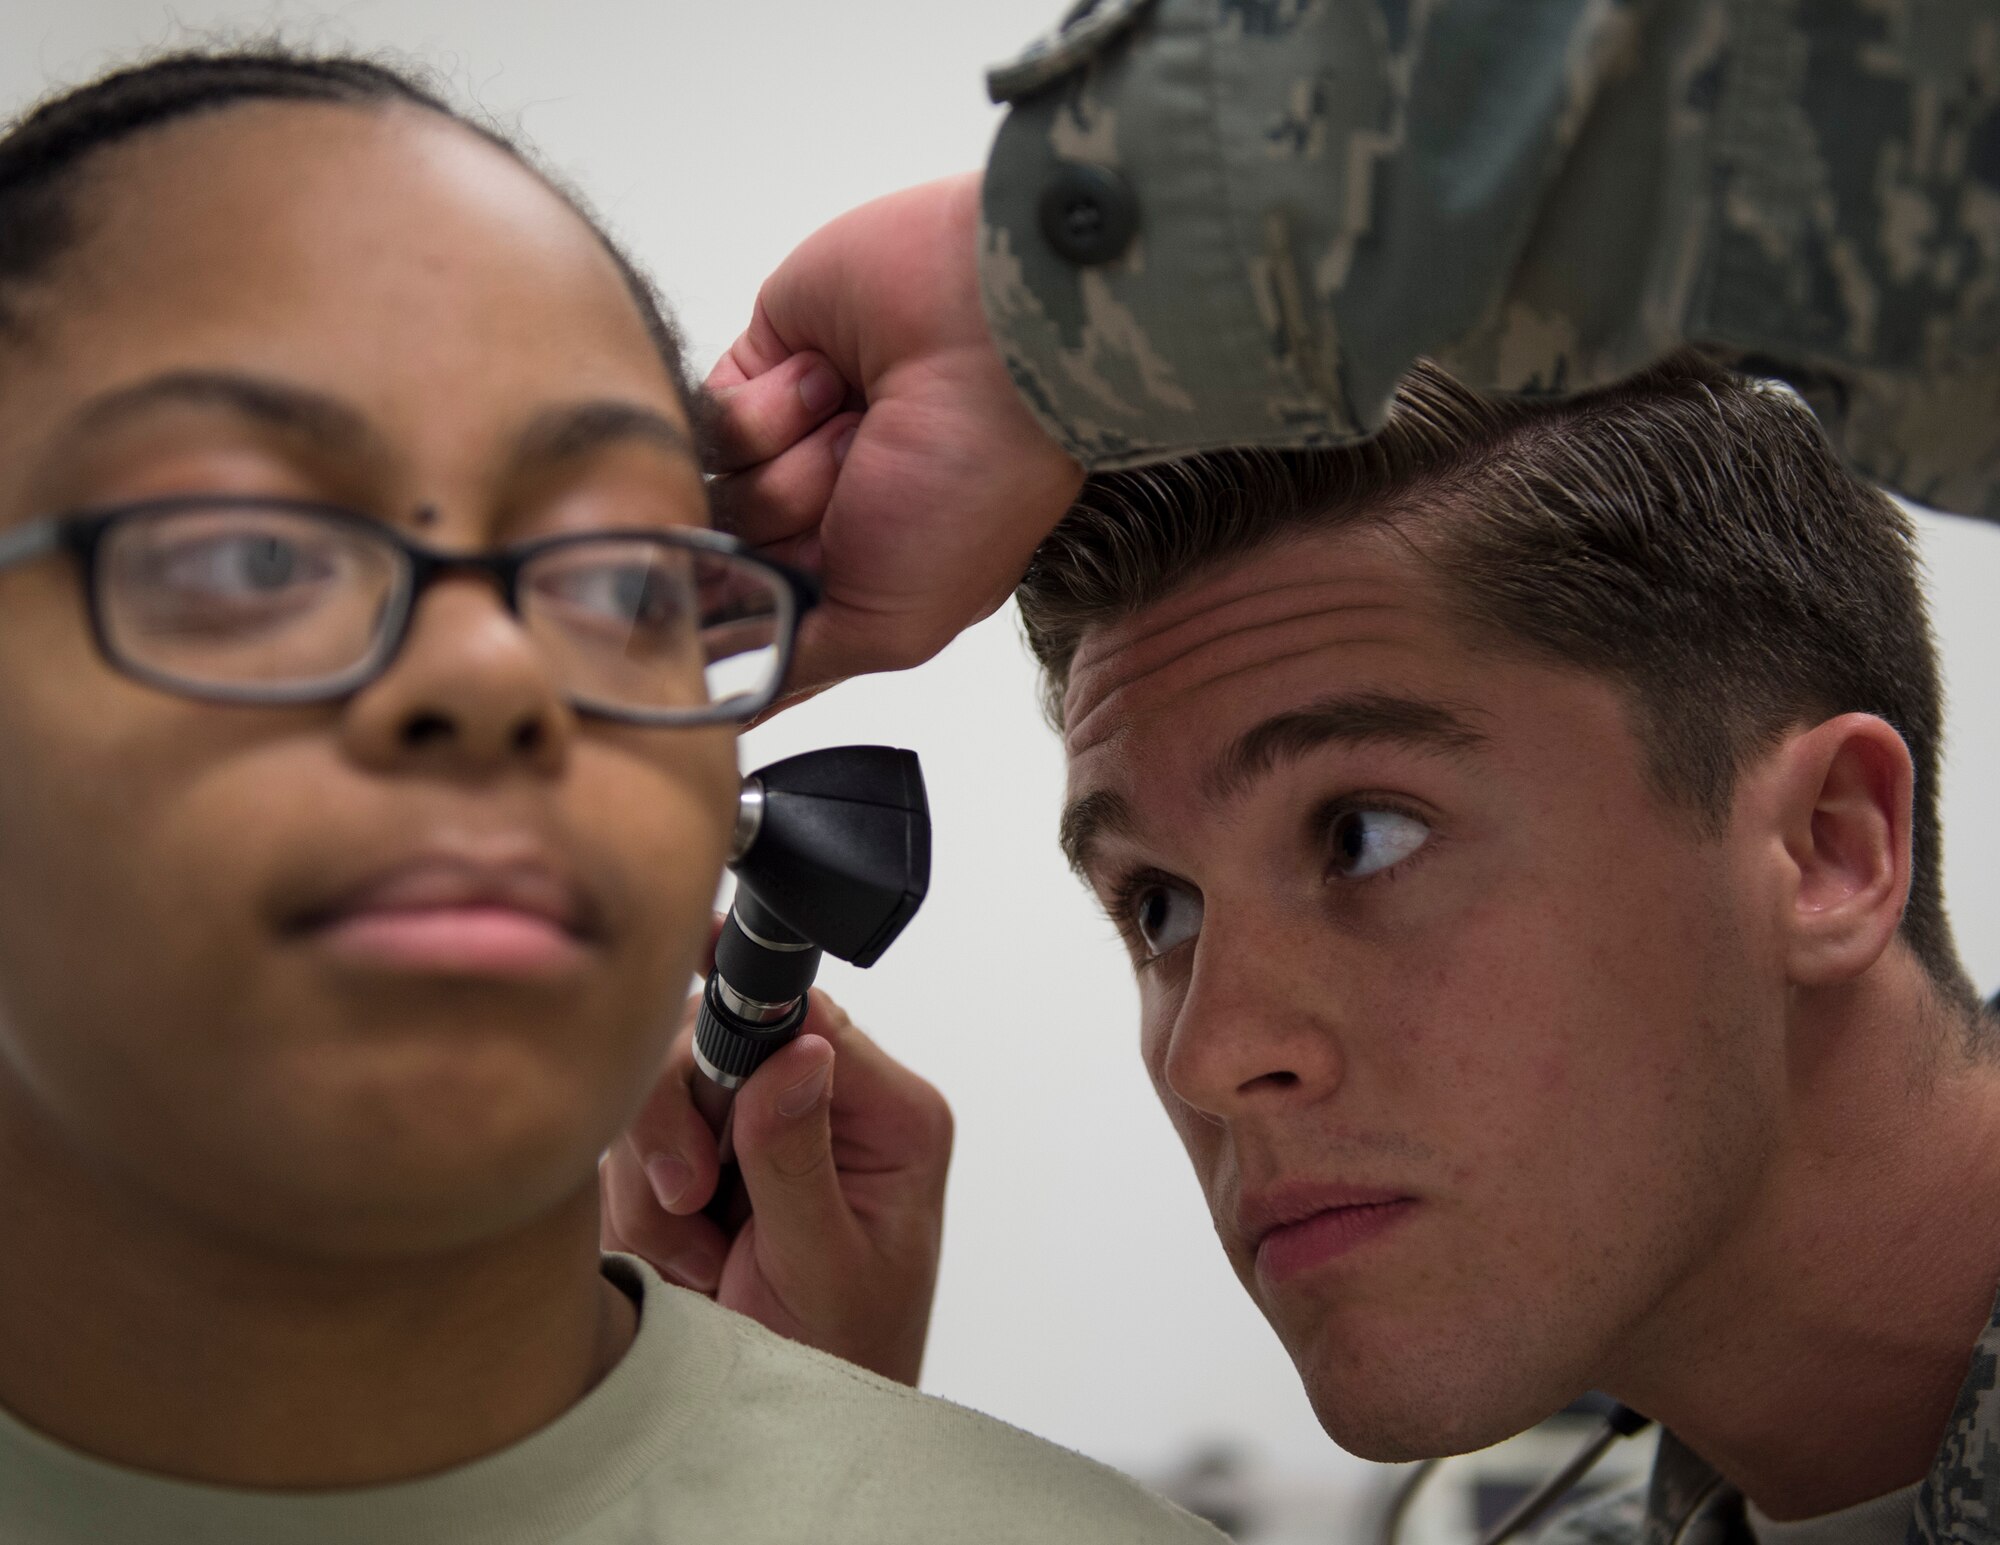 U.S. Air Force Senior Airman Tayler Tessitore, an emergency medical technician with the 379th Expeditionary Medical Operations Squadron, examines a patient’s ear in the primary care clinic at Al Udeid Air Base, Qatar, May 15, 2017. Emergency medical technicians assigned to the primary care clinic conduct a basic exam of the patient and report their findings to the doctor before they see the patient.  
(U.S. Air Force photo by Tech. Sgt. Amy M. Lovgren)